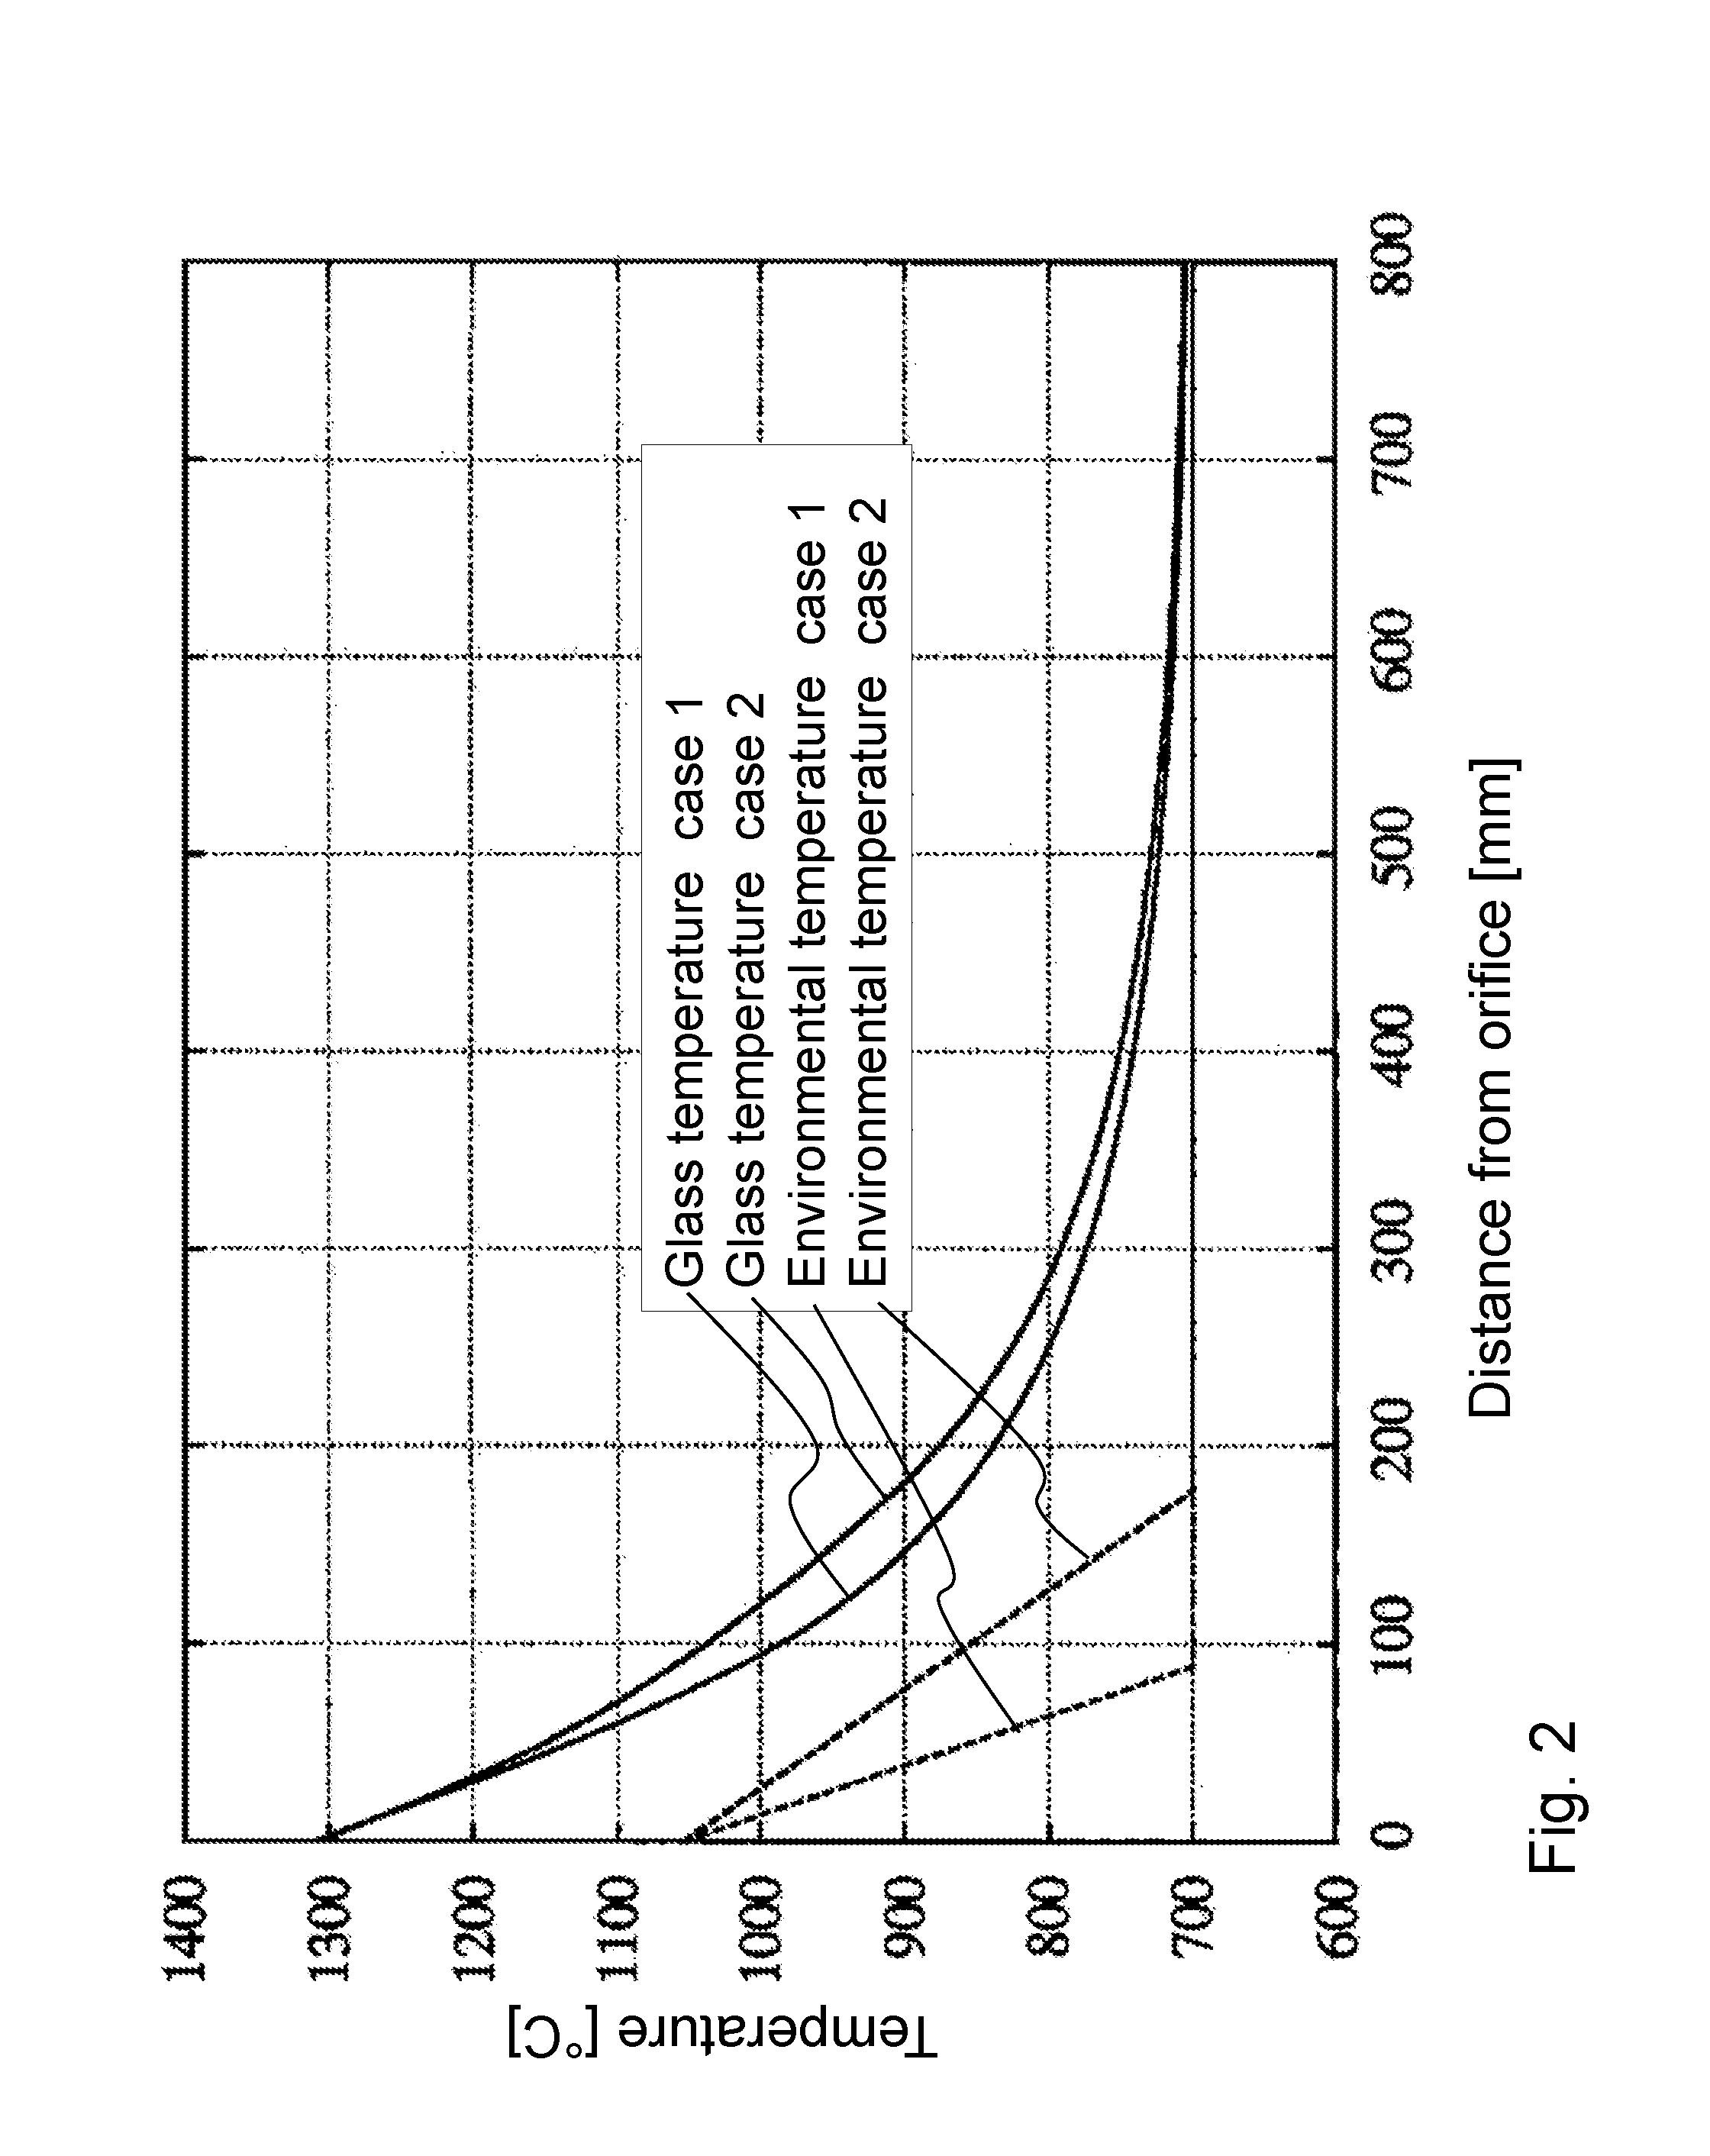 Method and apparatus for producing a thin glass ribbon, and thin glass ribbon produced according to such method